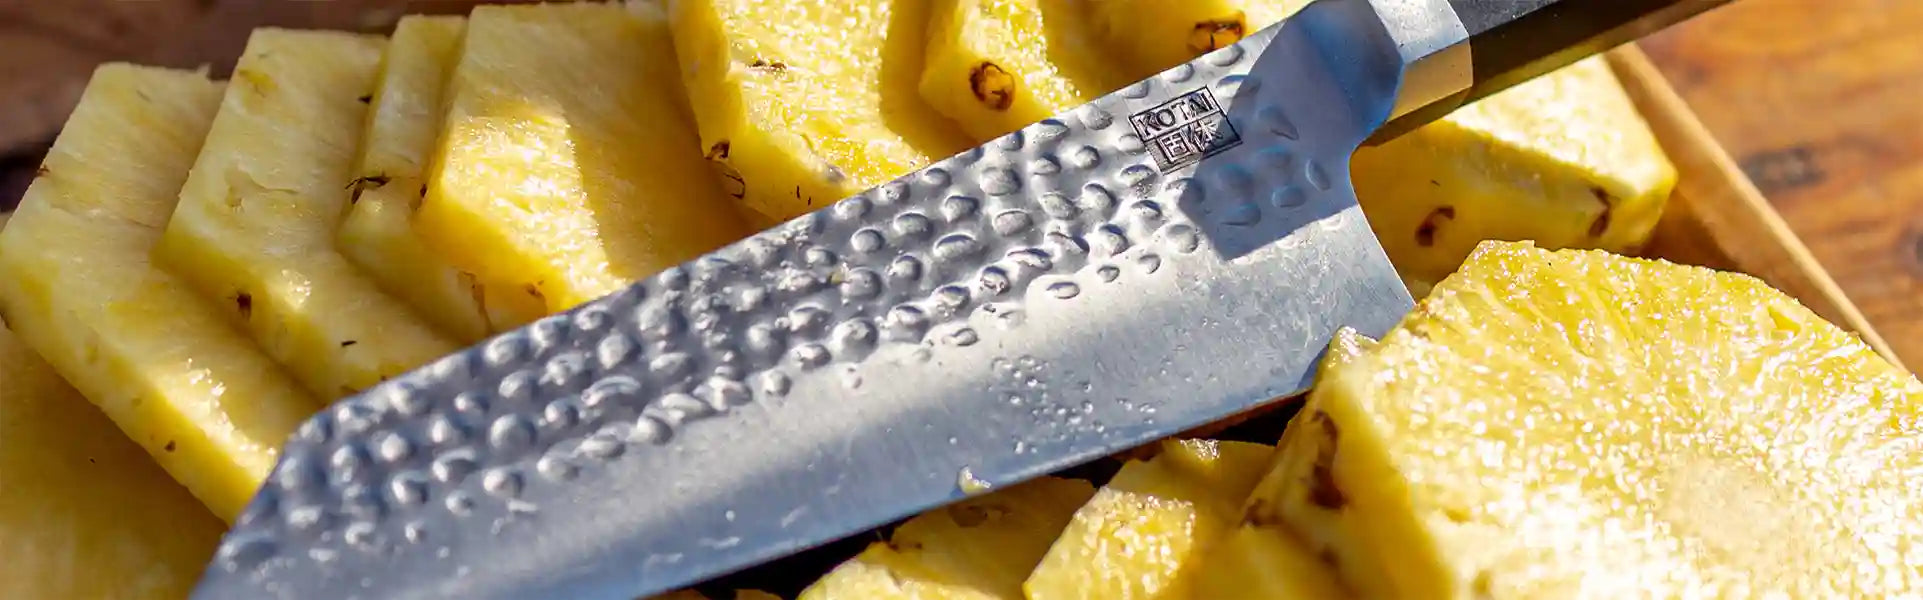 How To Sharpen A Knife Without A Sharpener